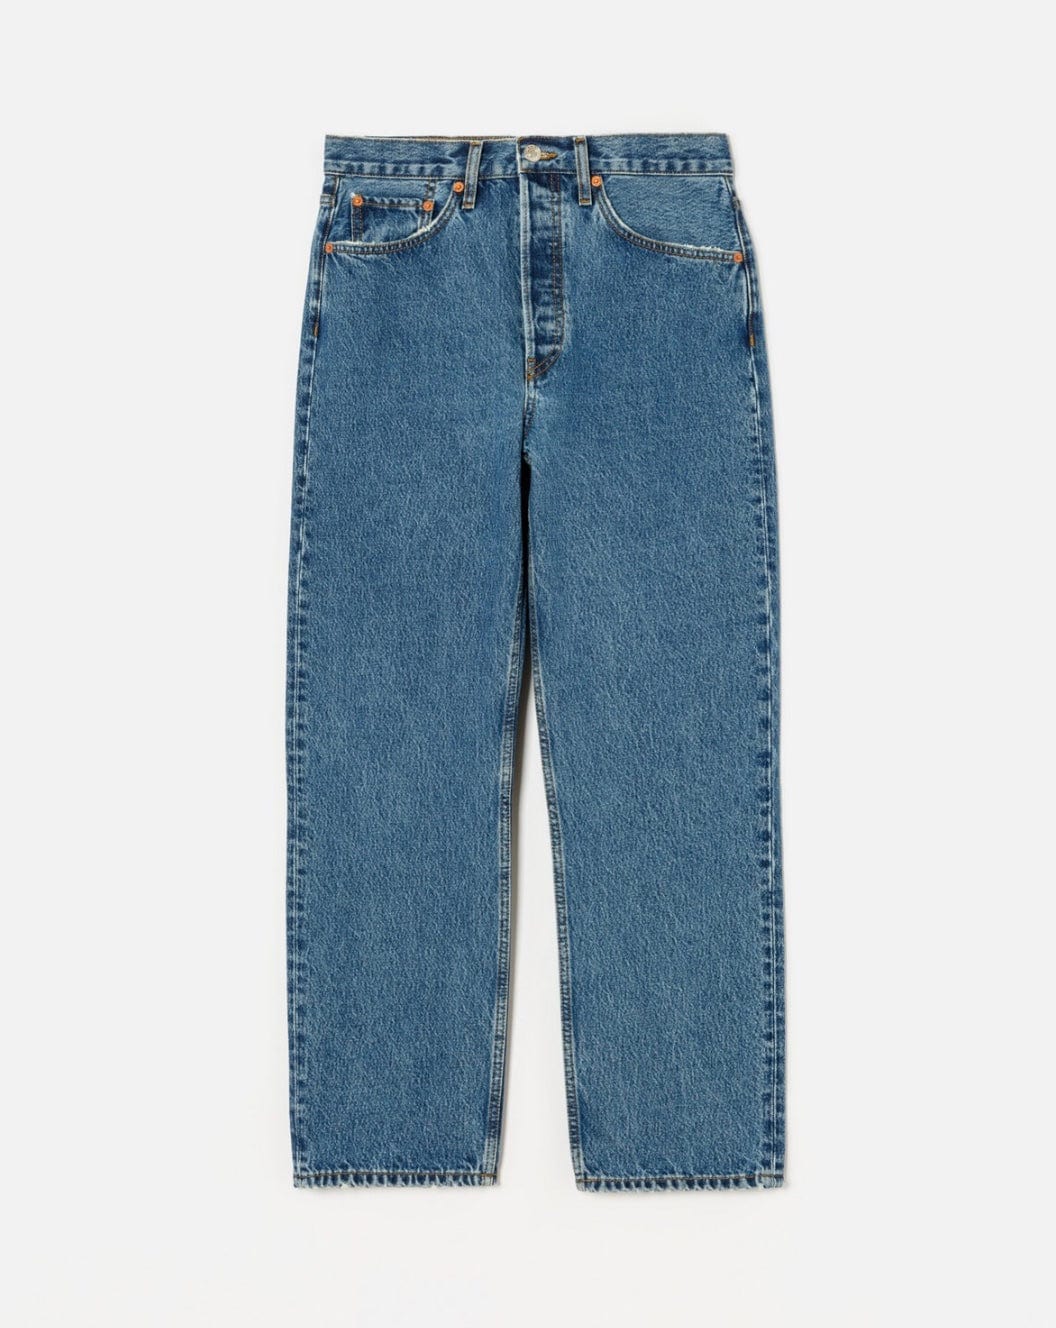 90s Low Slung jeans in blue - Re Done